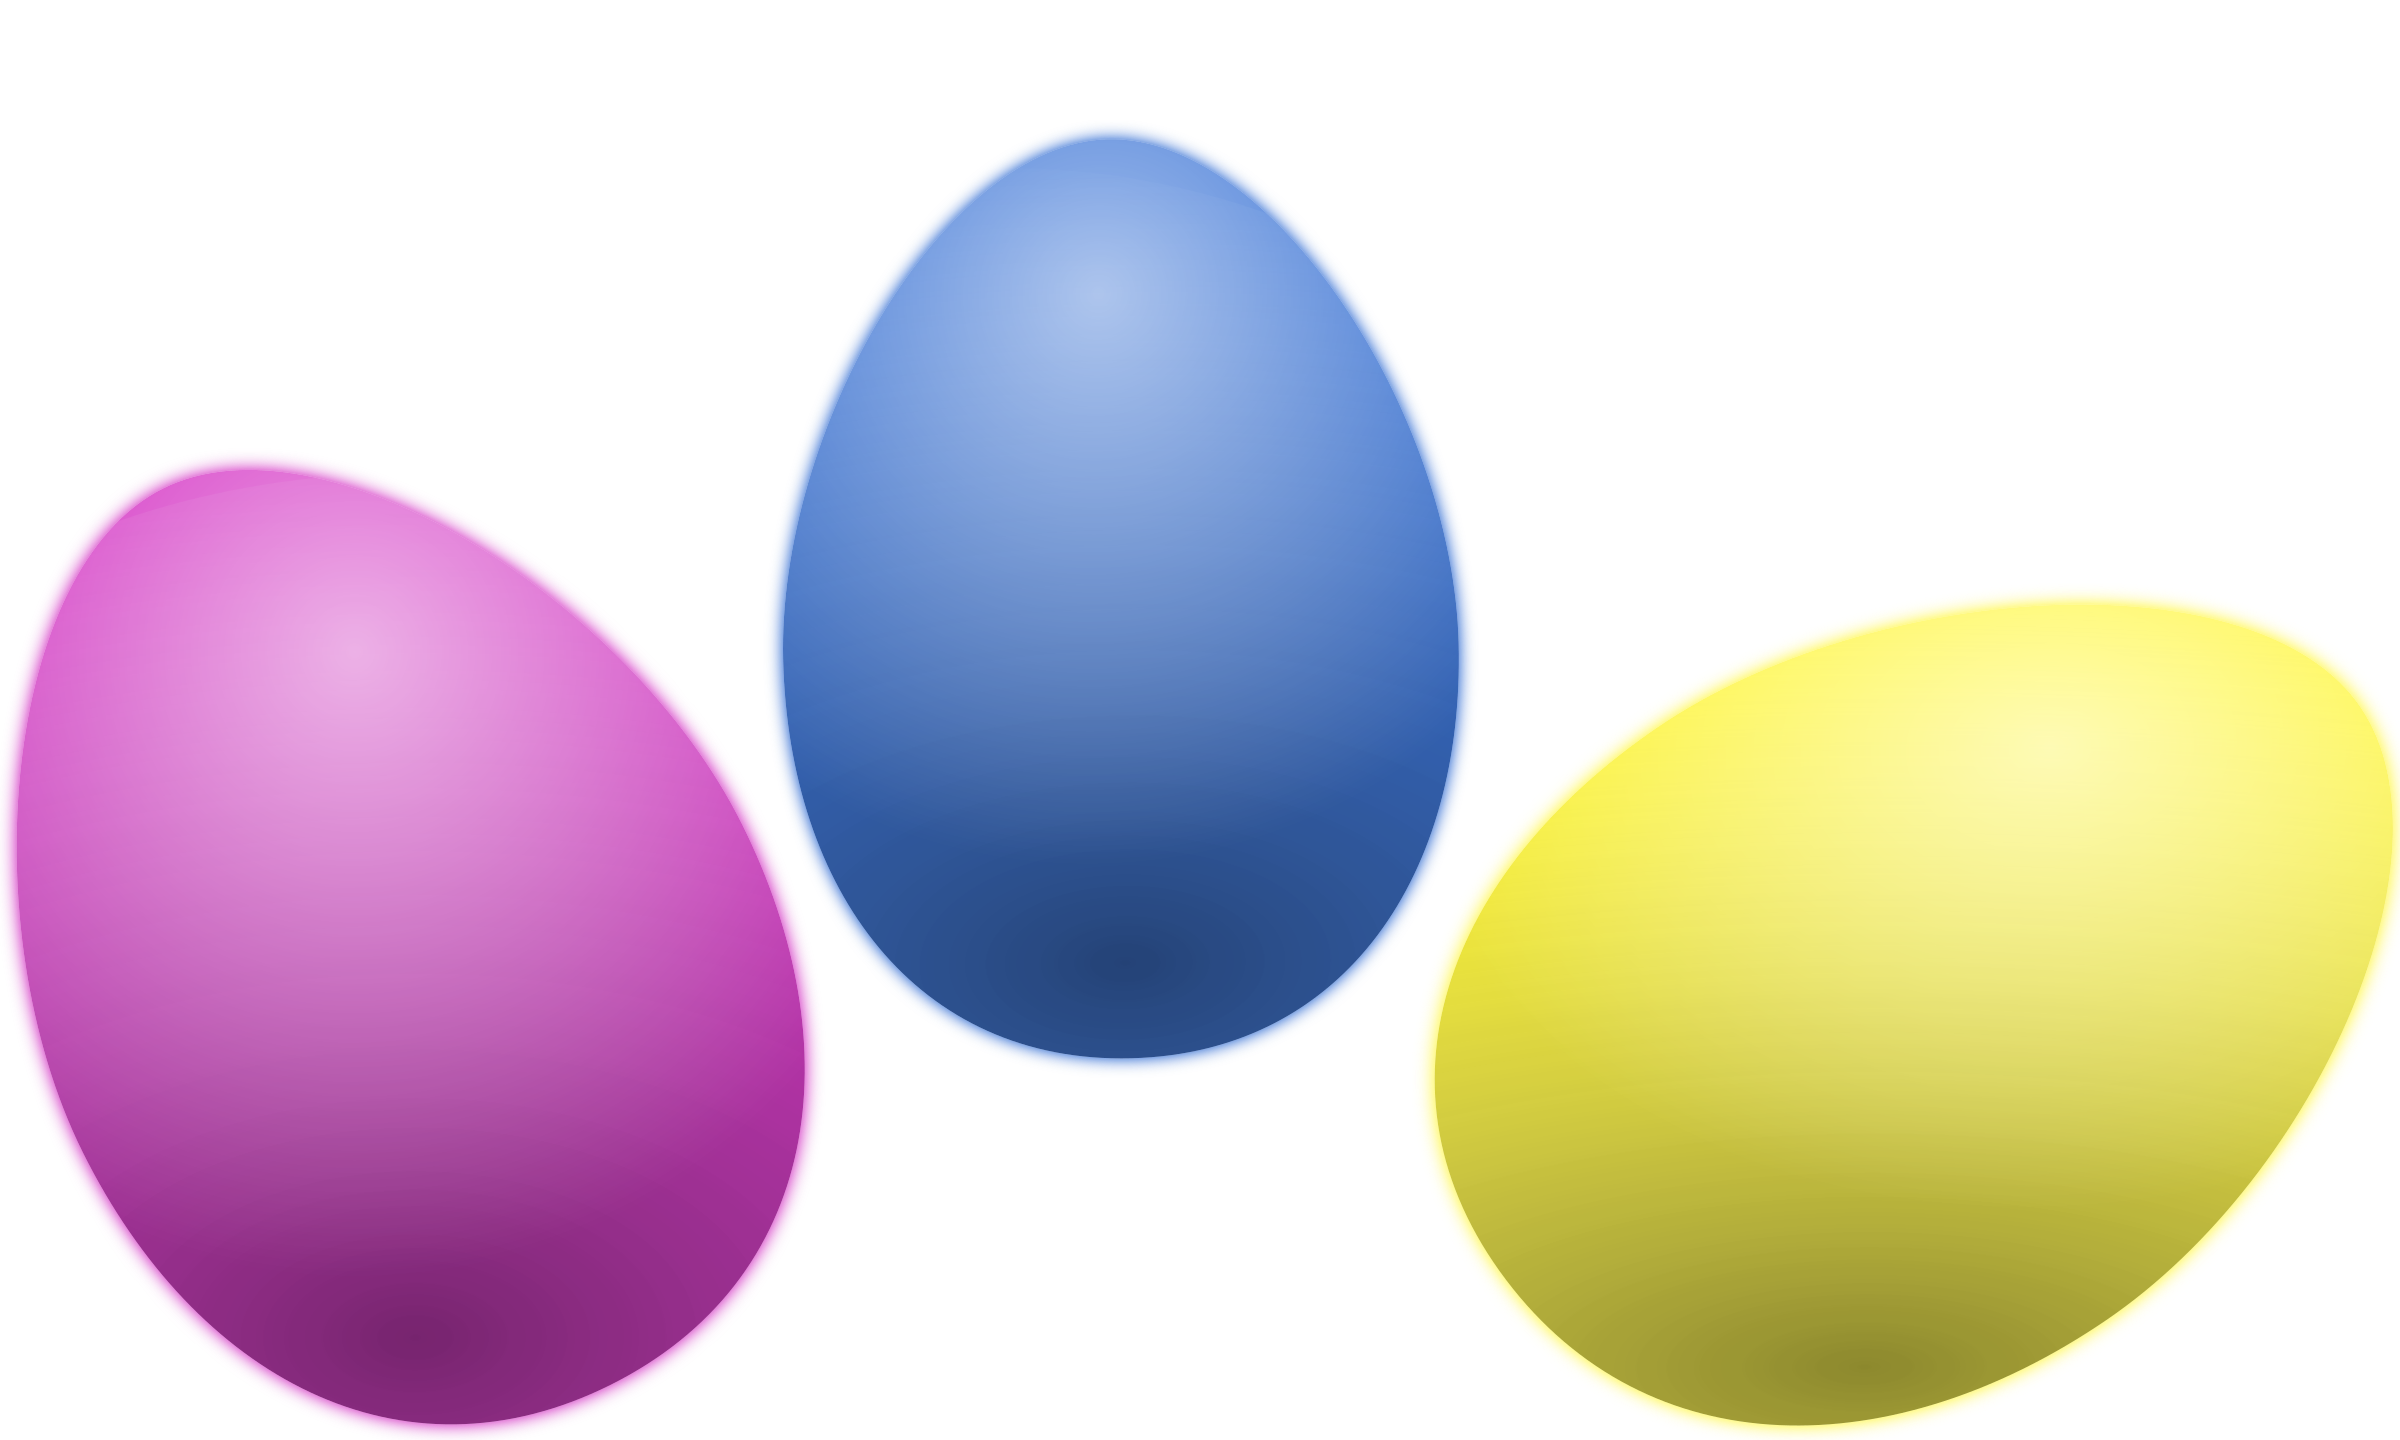 Big Image (Png) - Easter Eggs, Transparent background PNG HD thumbnail